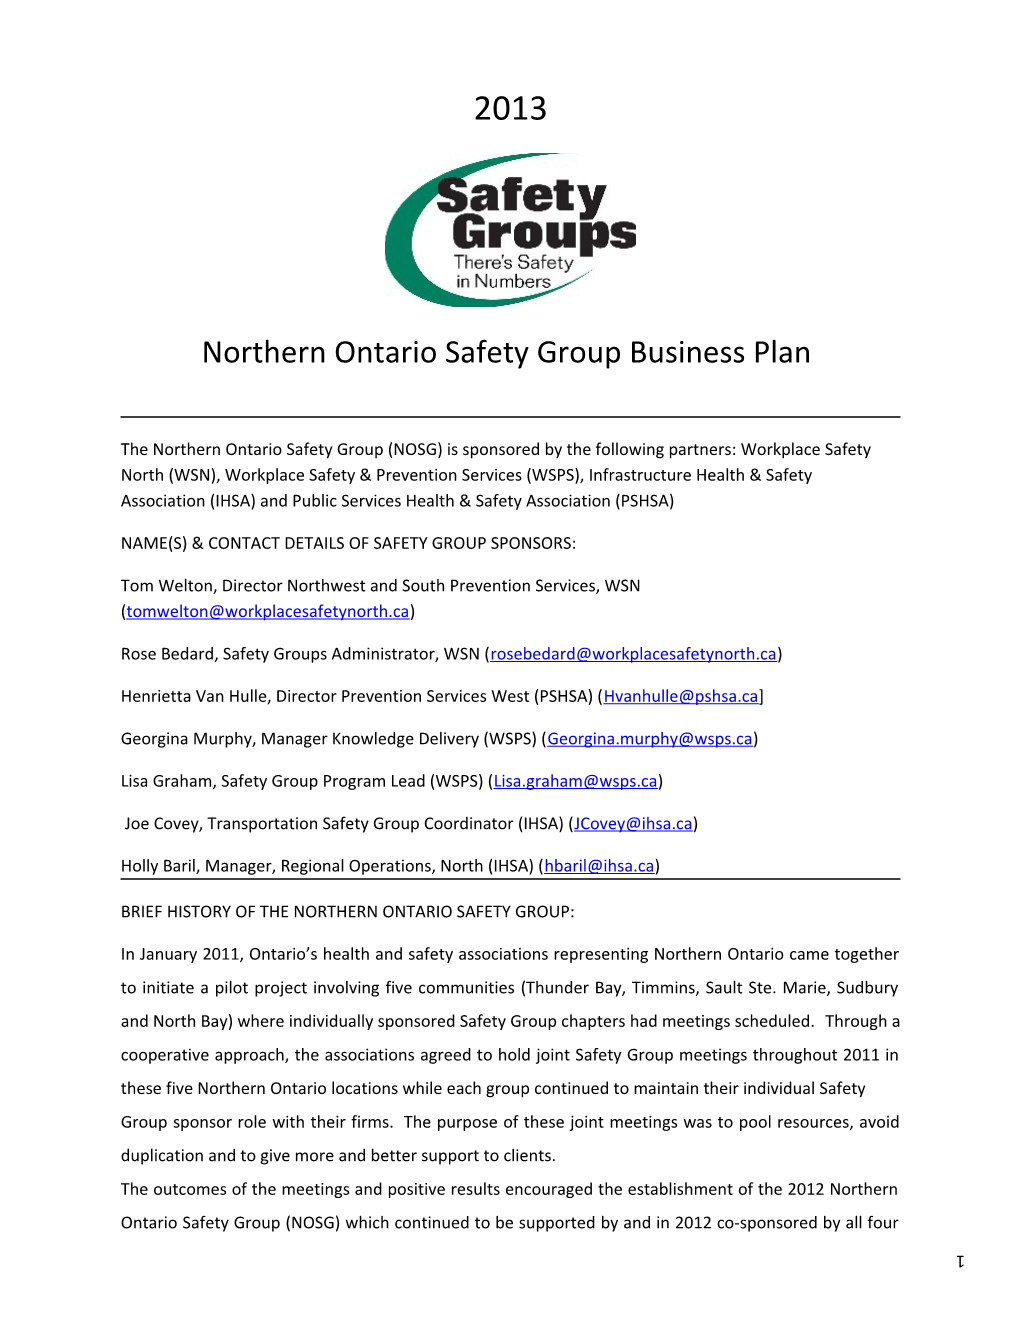 Northern Ontario Safety Group Business Plan